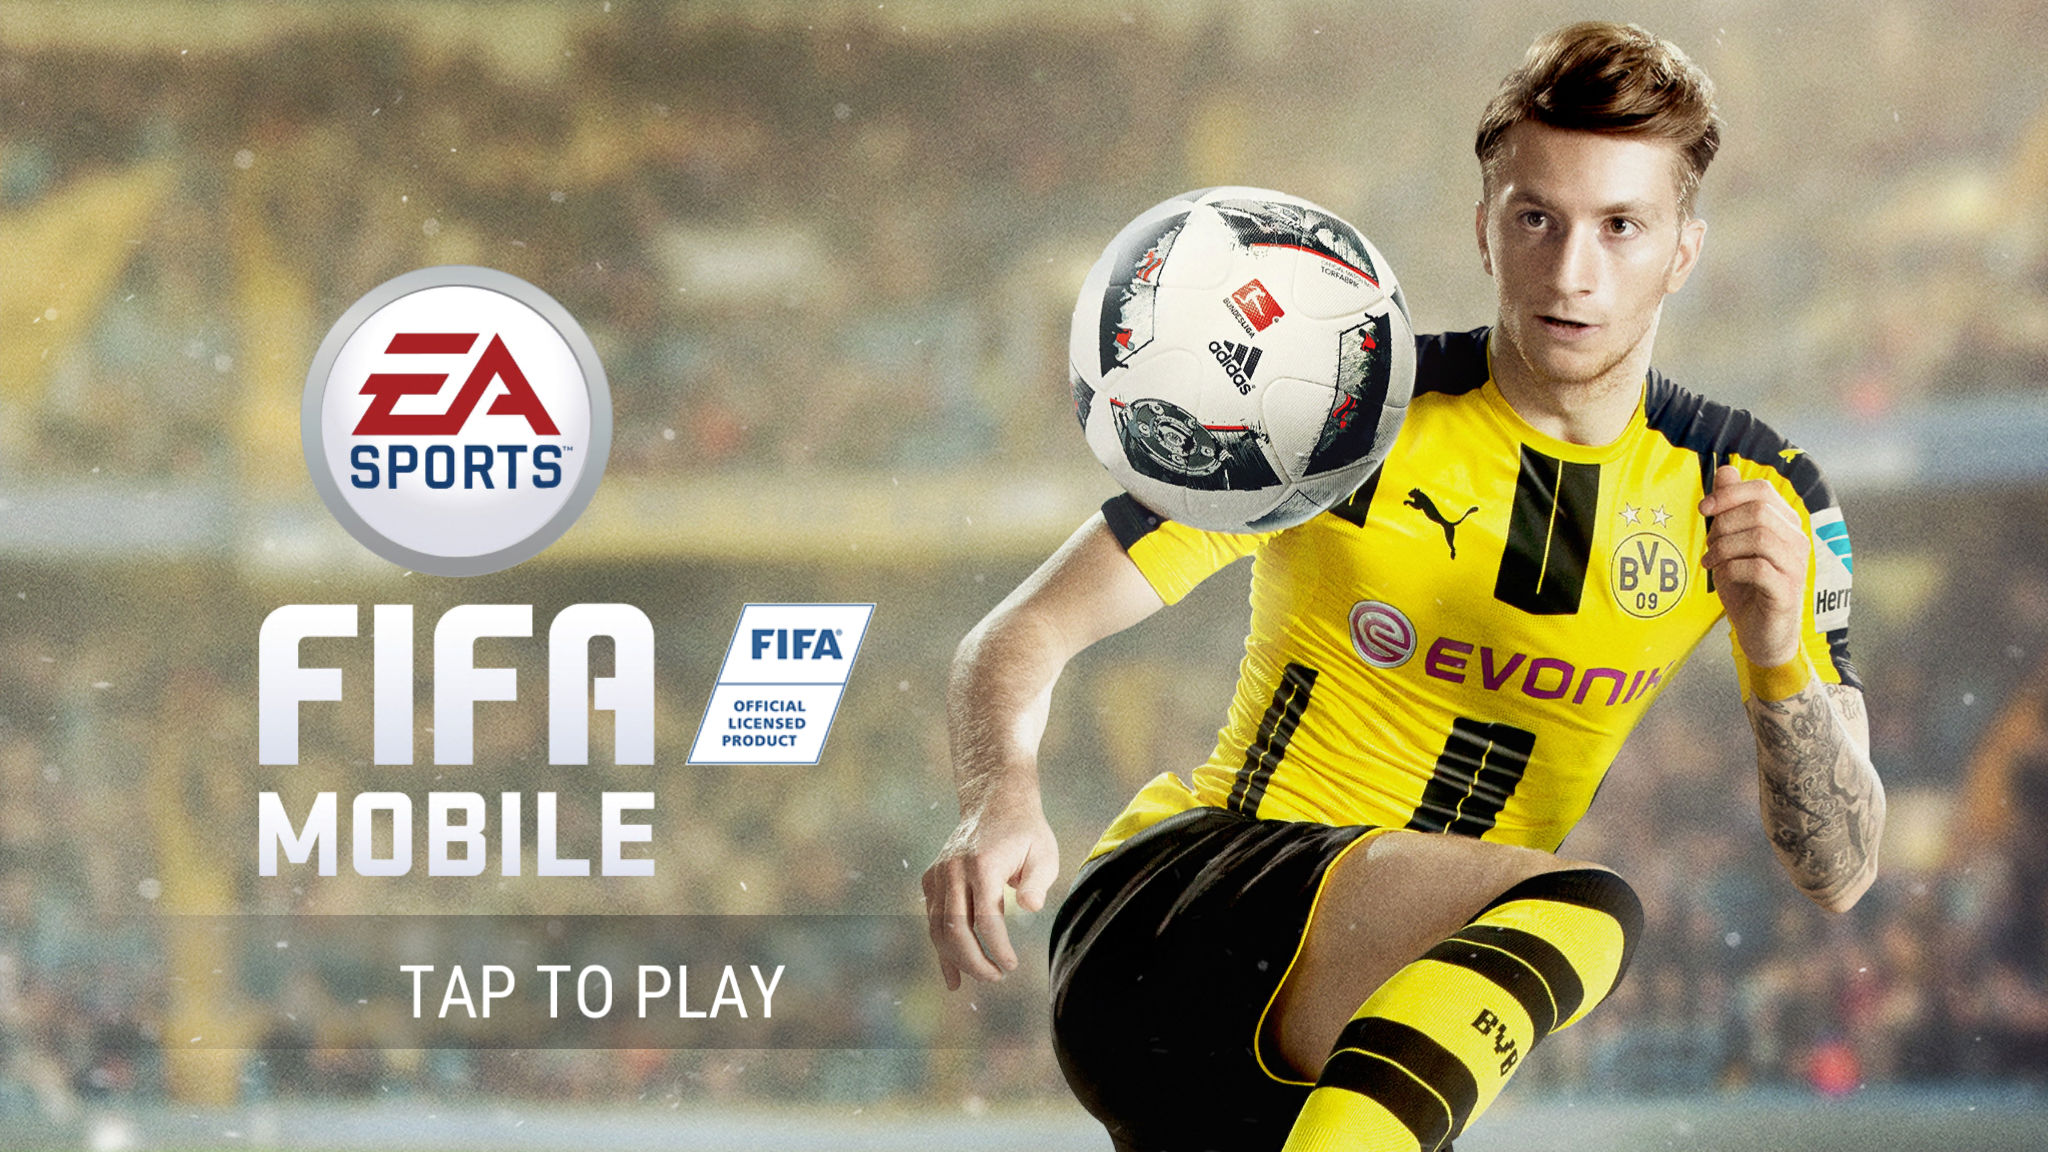 When is FIFA Mobile coming out?